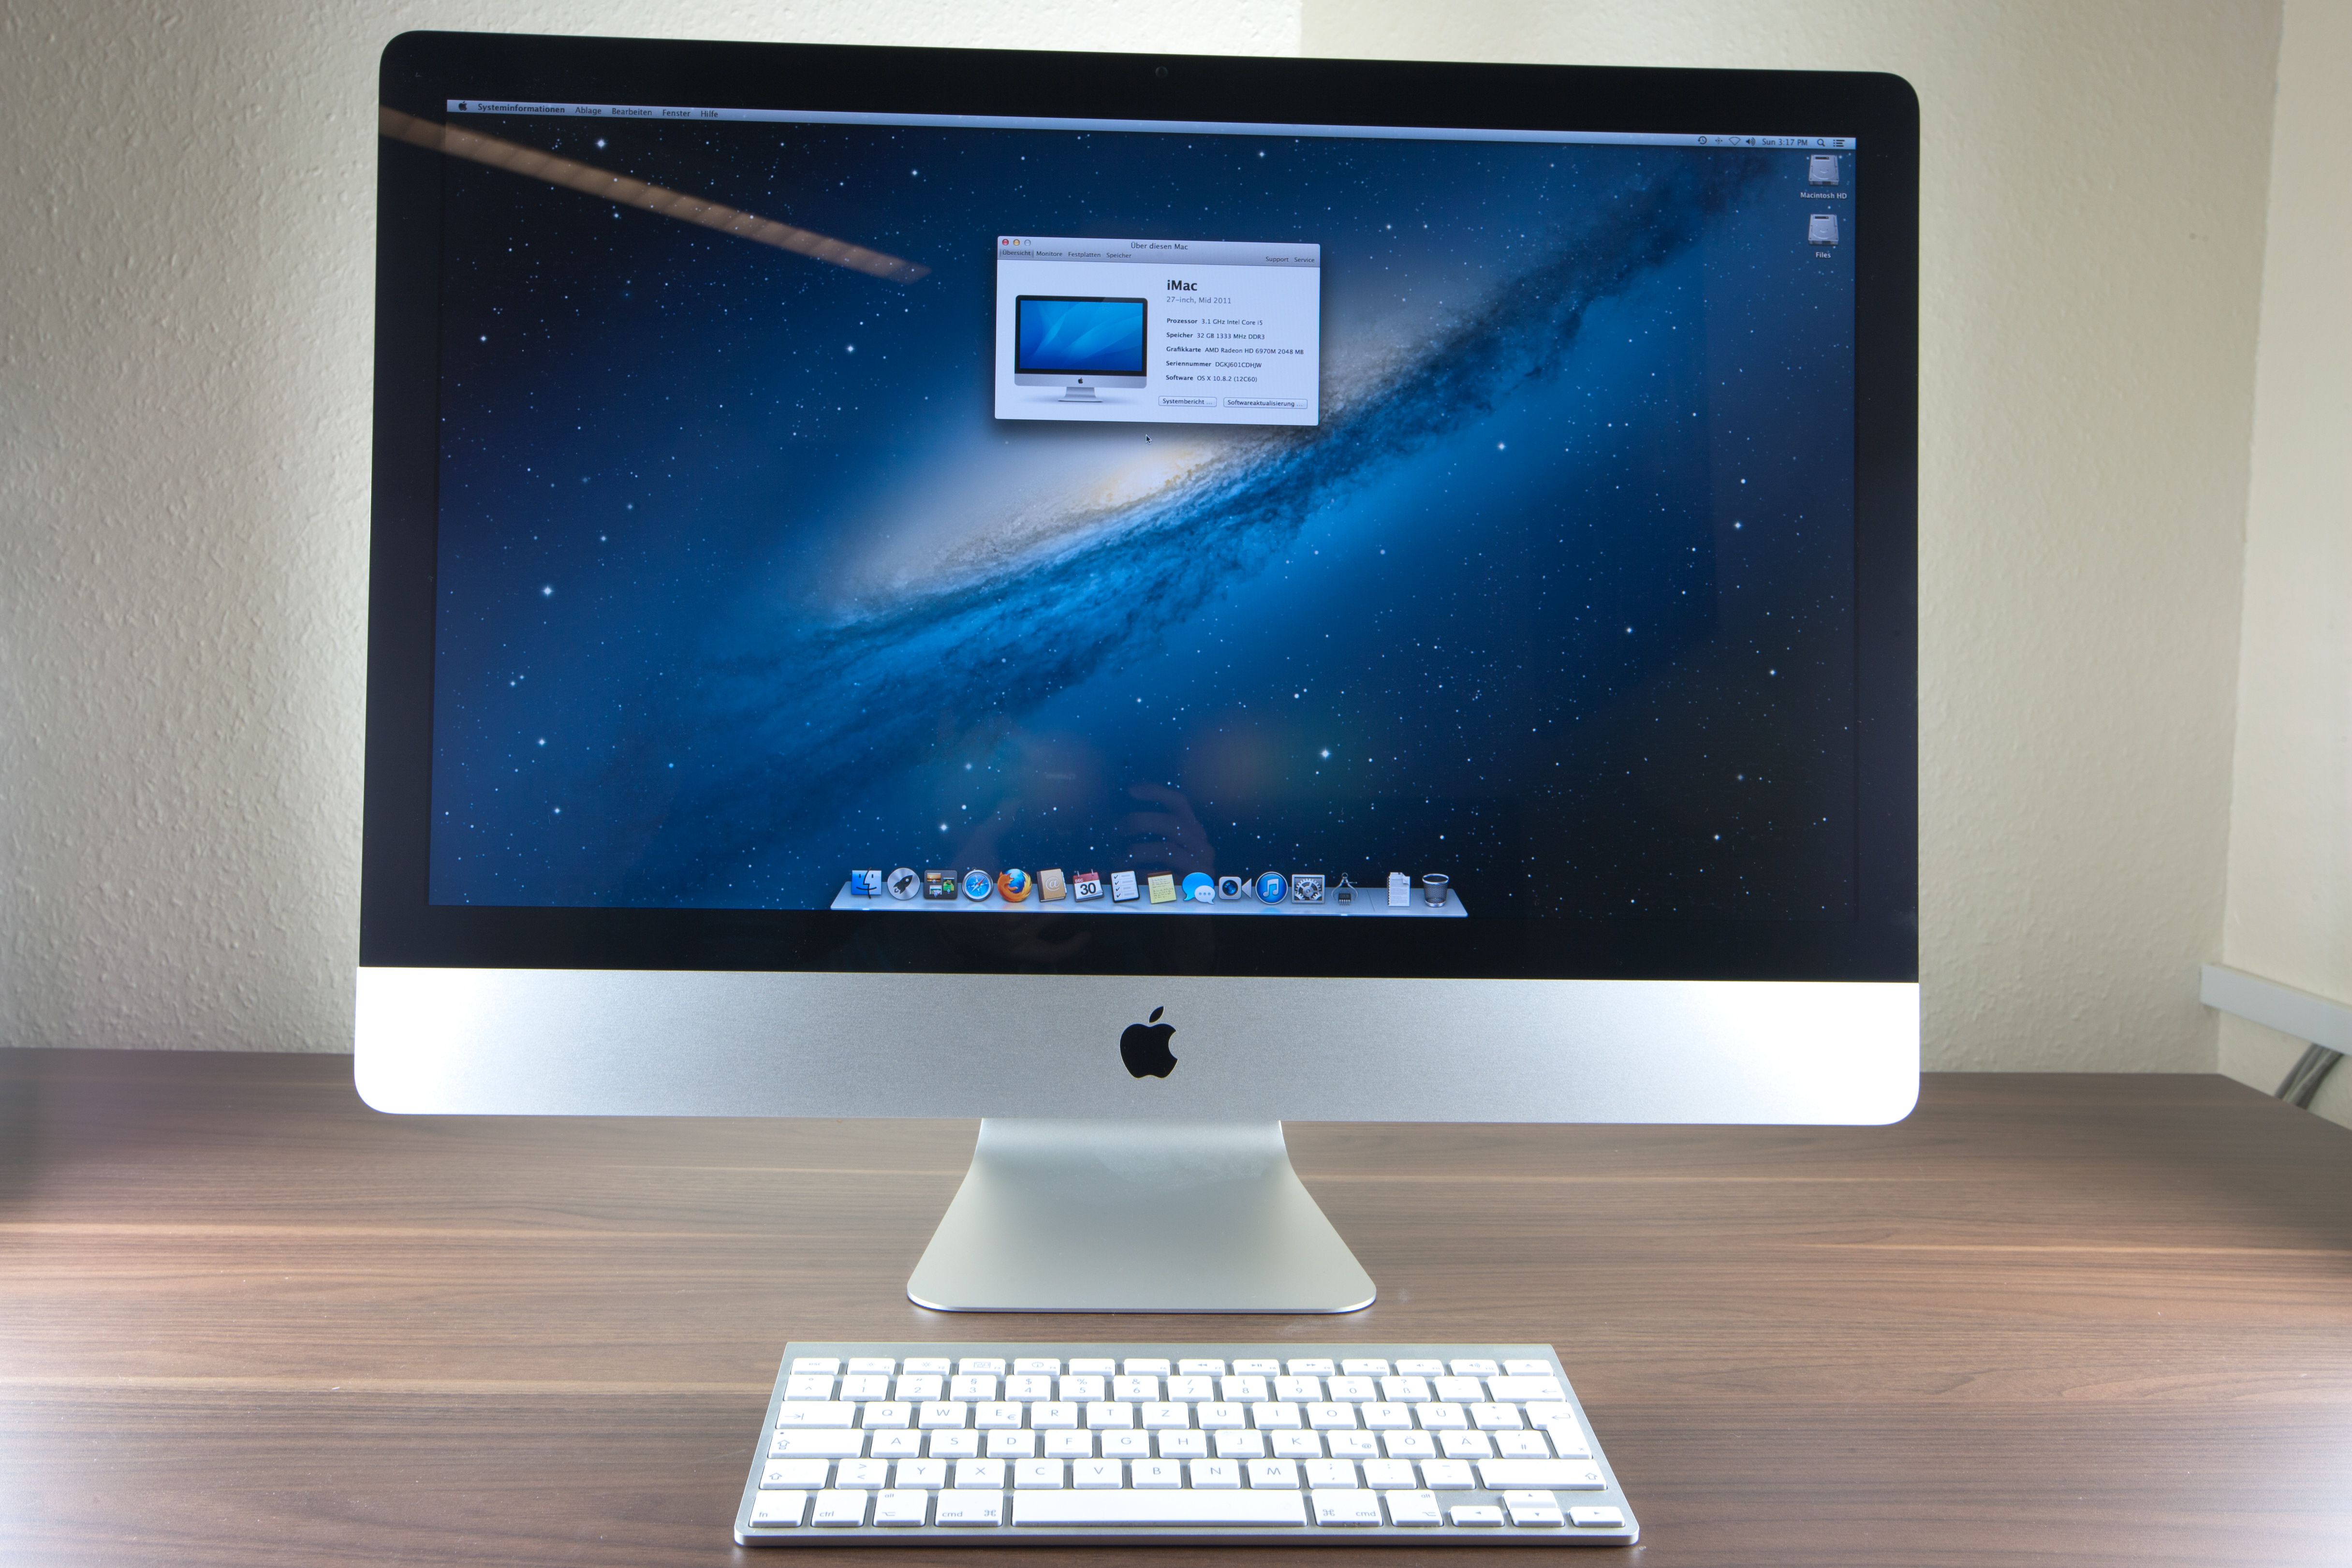 A slim 27" 2012 iMac sits on a desk with a keyboard in front of it